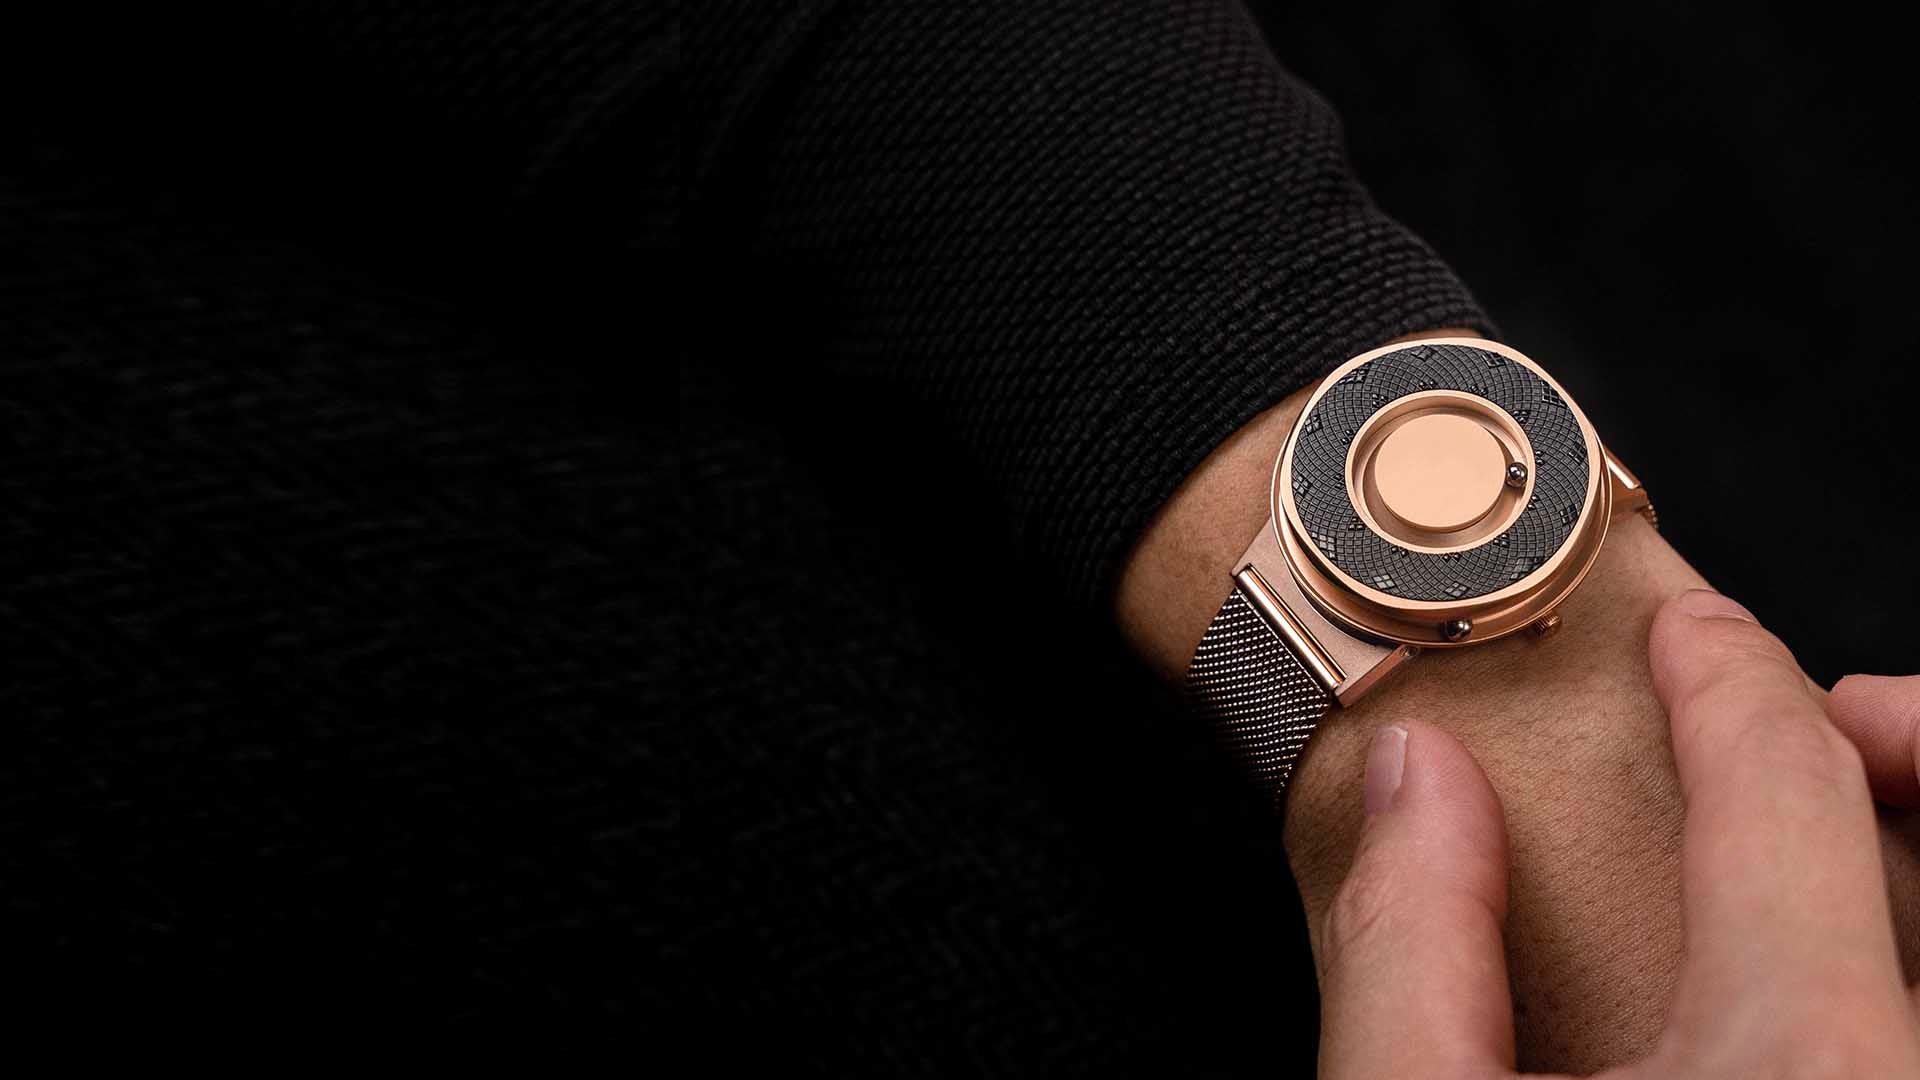 A wristshot of the Eone Rose Gold switch with a black sunflower ring attached. The timepiece is on a male wrist contrasted with a black sleeved top on a black dark background.